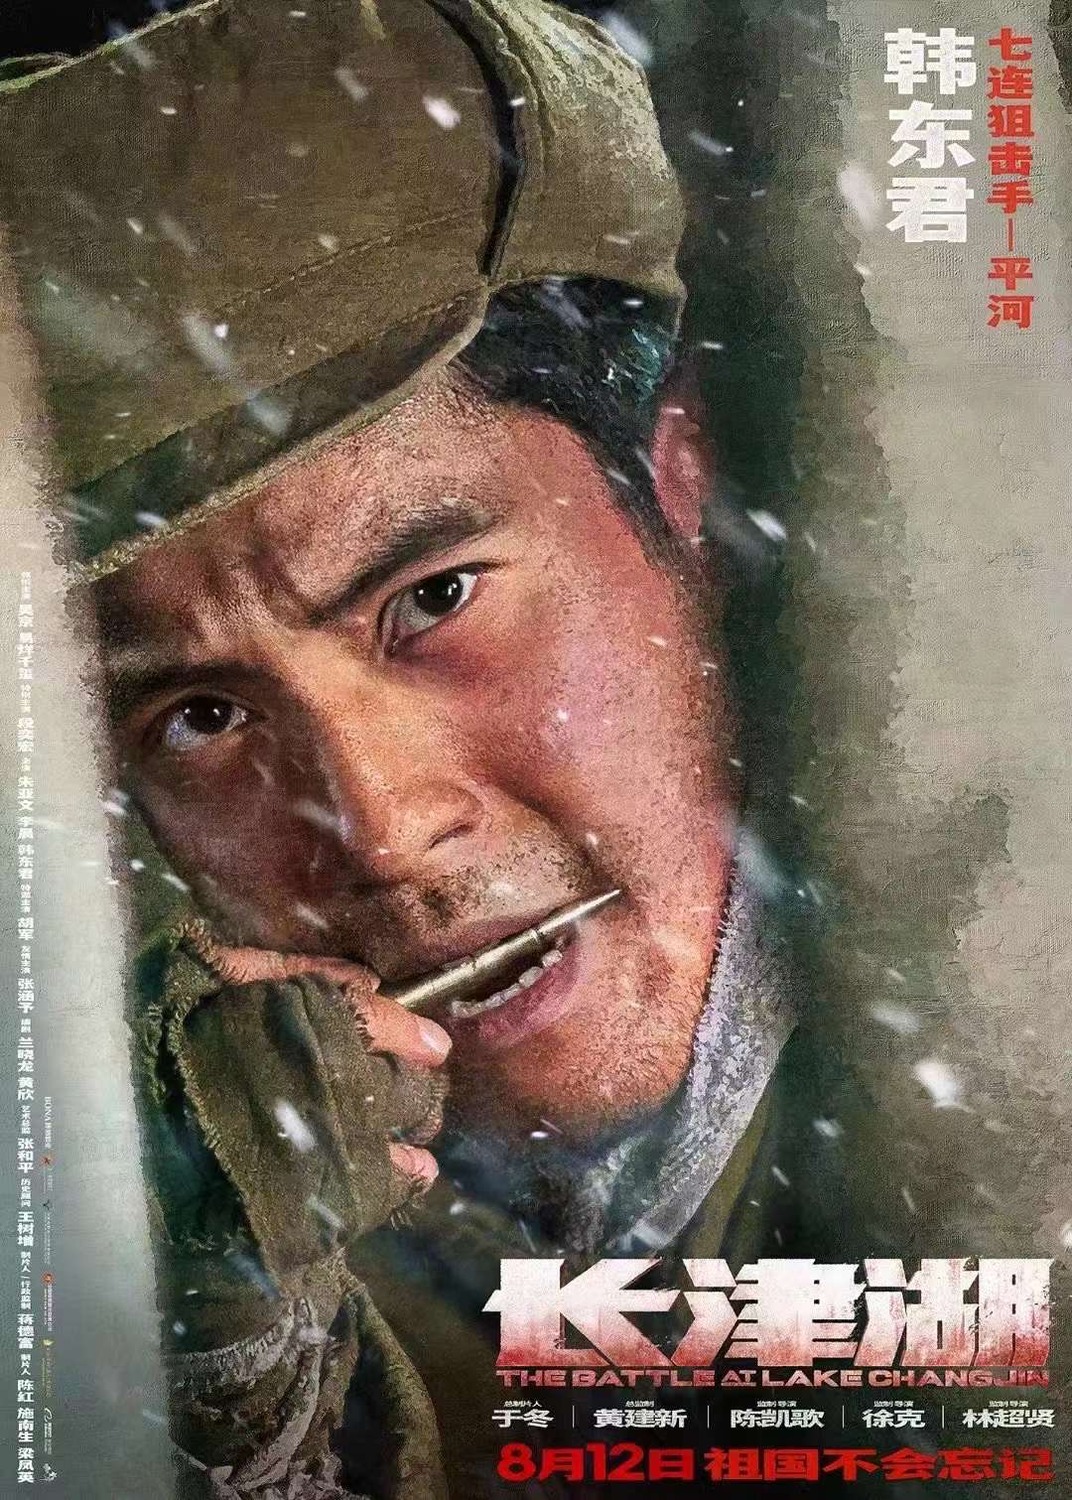 Extra Large Movie Poster Image for The Battle at Lake Changjin (#10 of 24)